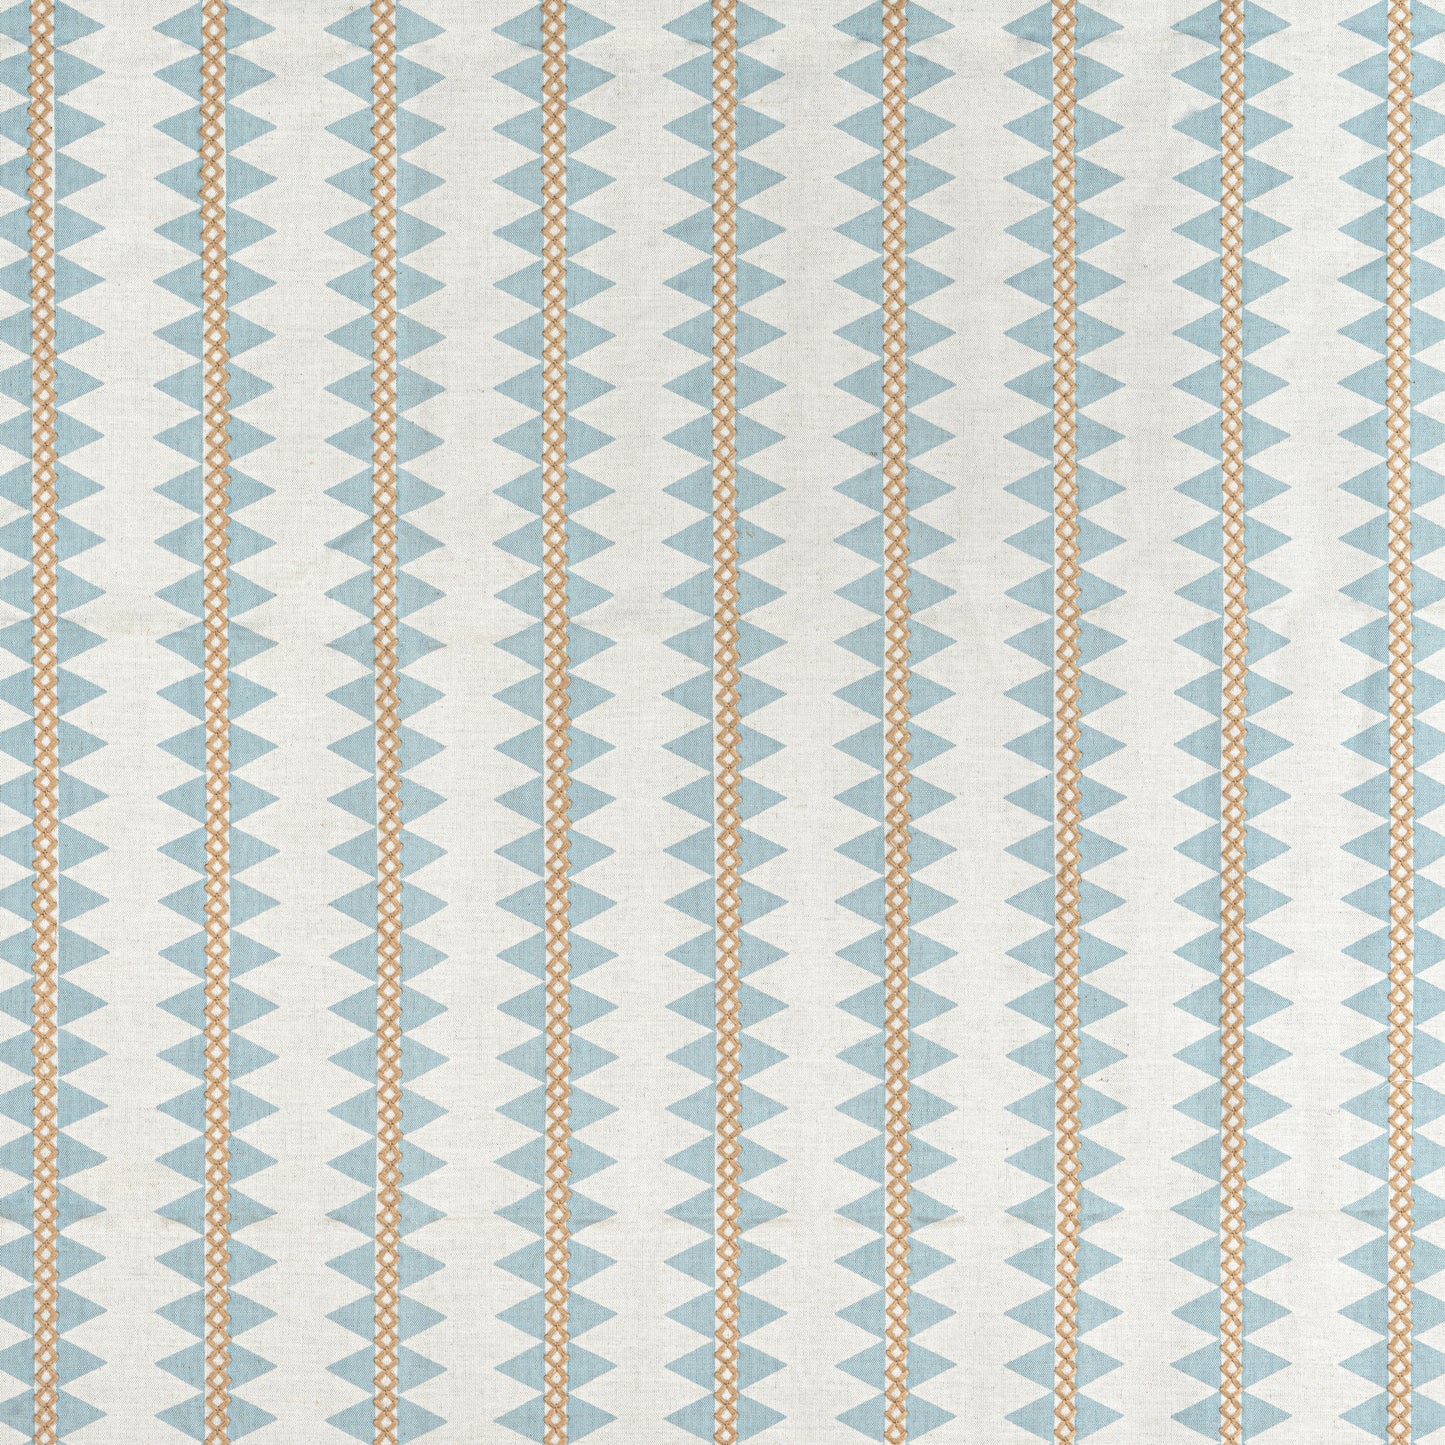 Purchase Thibaut Fabric Product# W713241 pattern name Reno Stripe Embroidery color Spa Blue